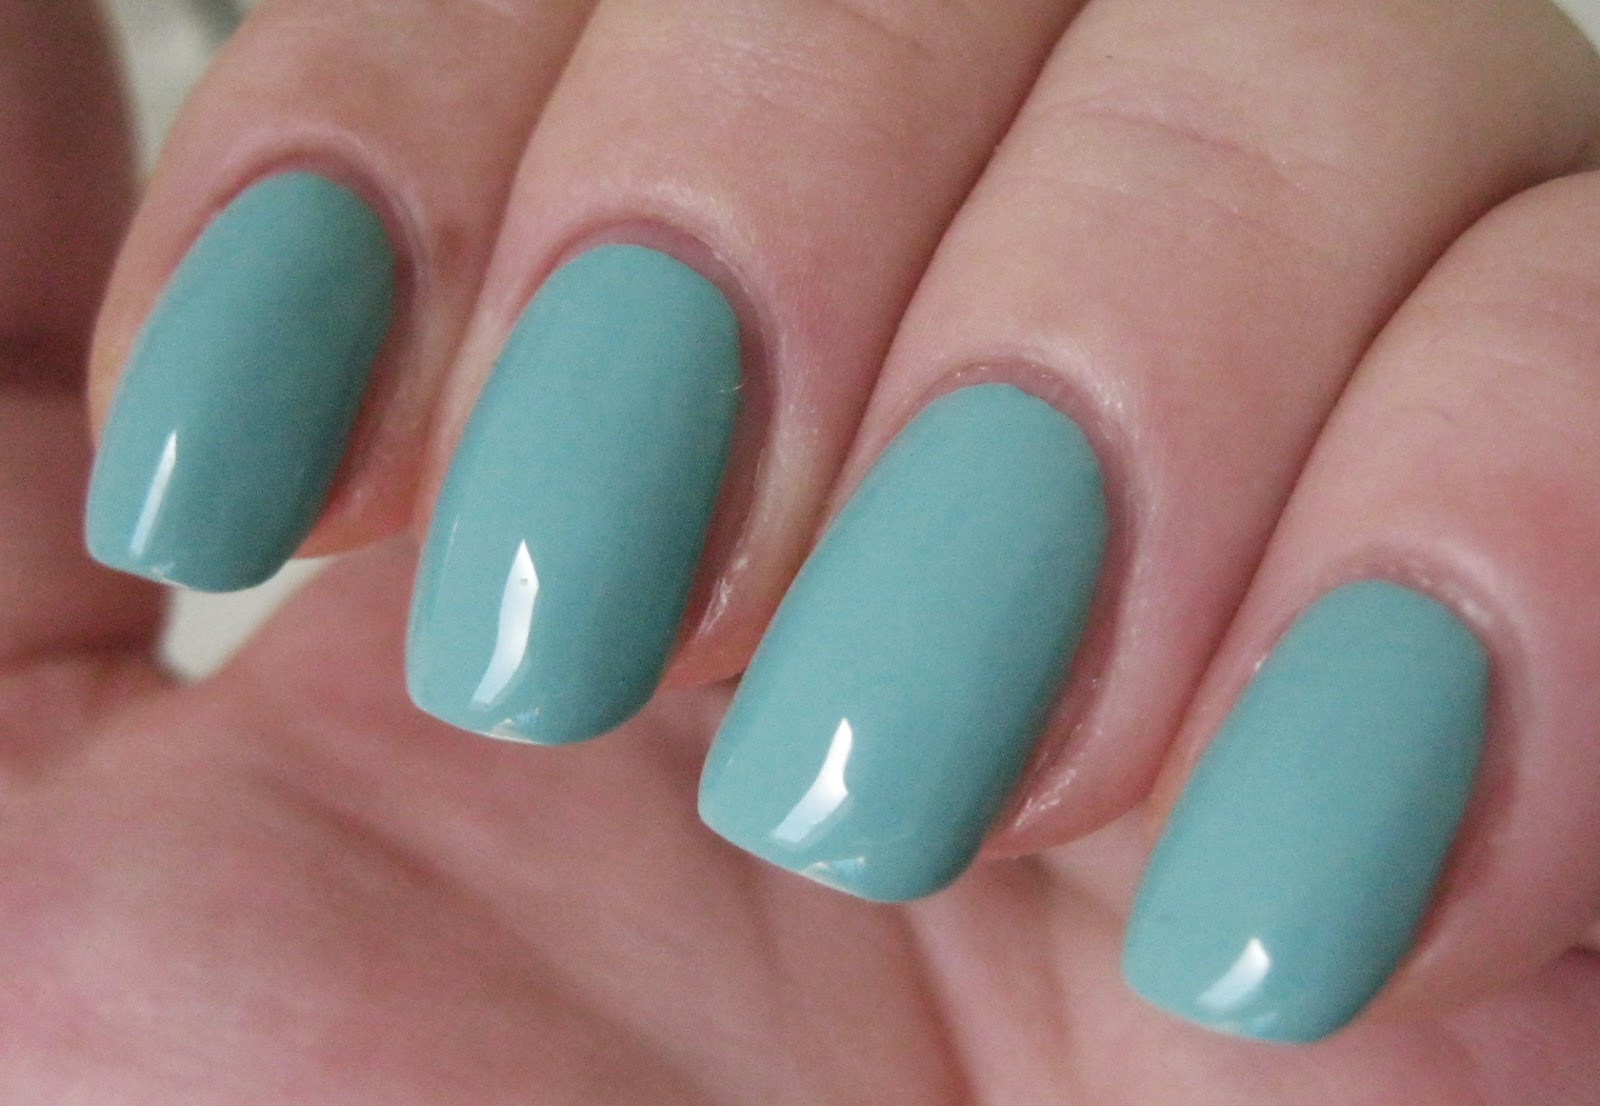 4. China Glaze Nail Lacquer in "For Audrey" - wide 10